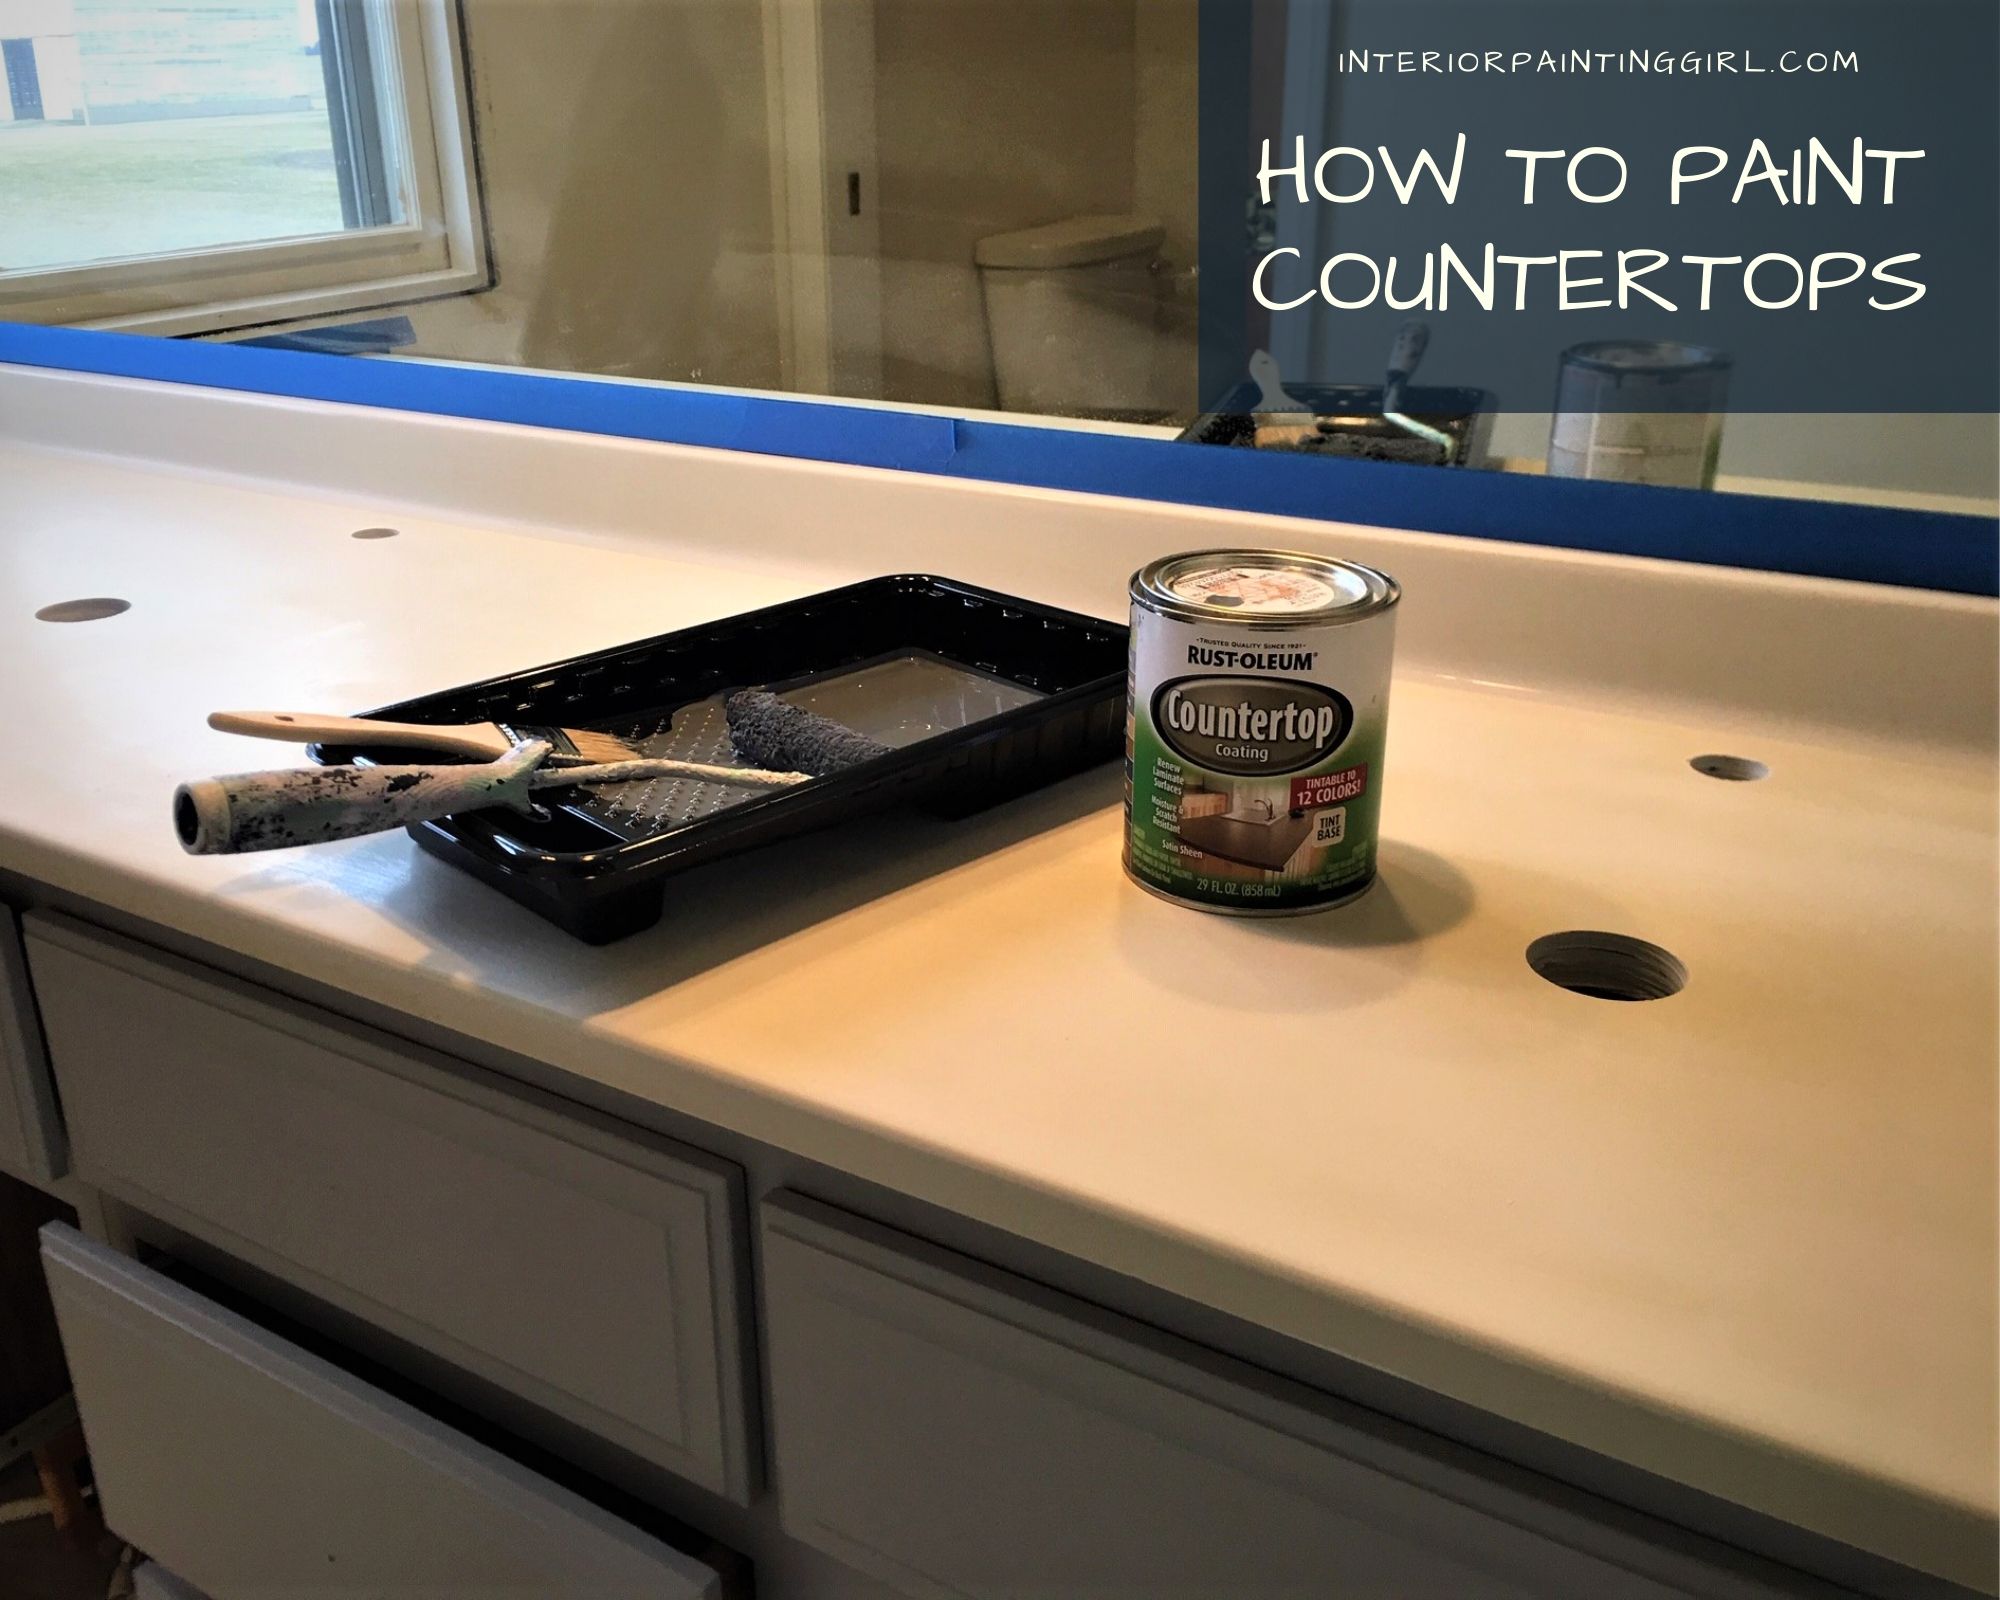 How To Paint Countertops - A Step-by-Step Guide from That Interior Painting Girl!